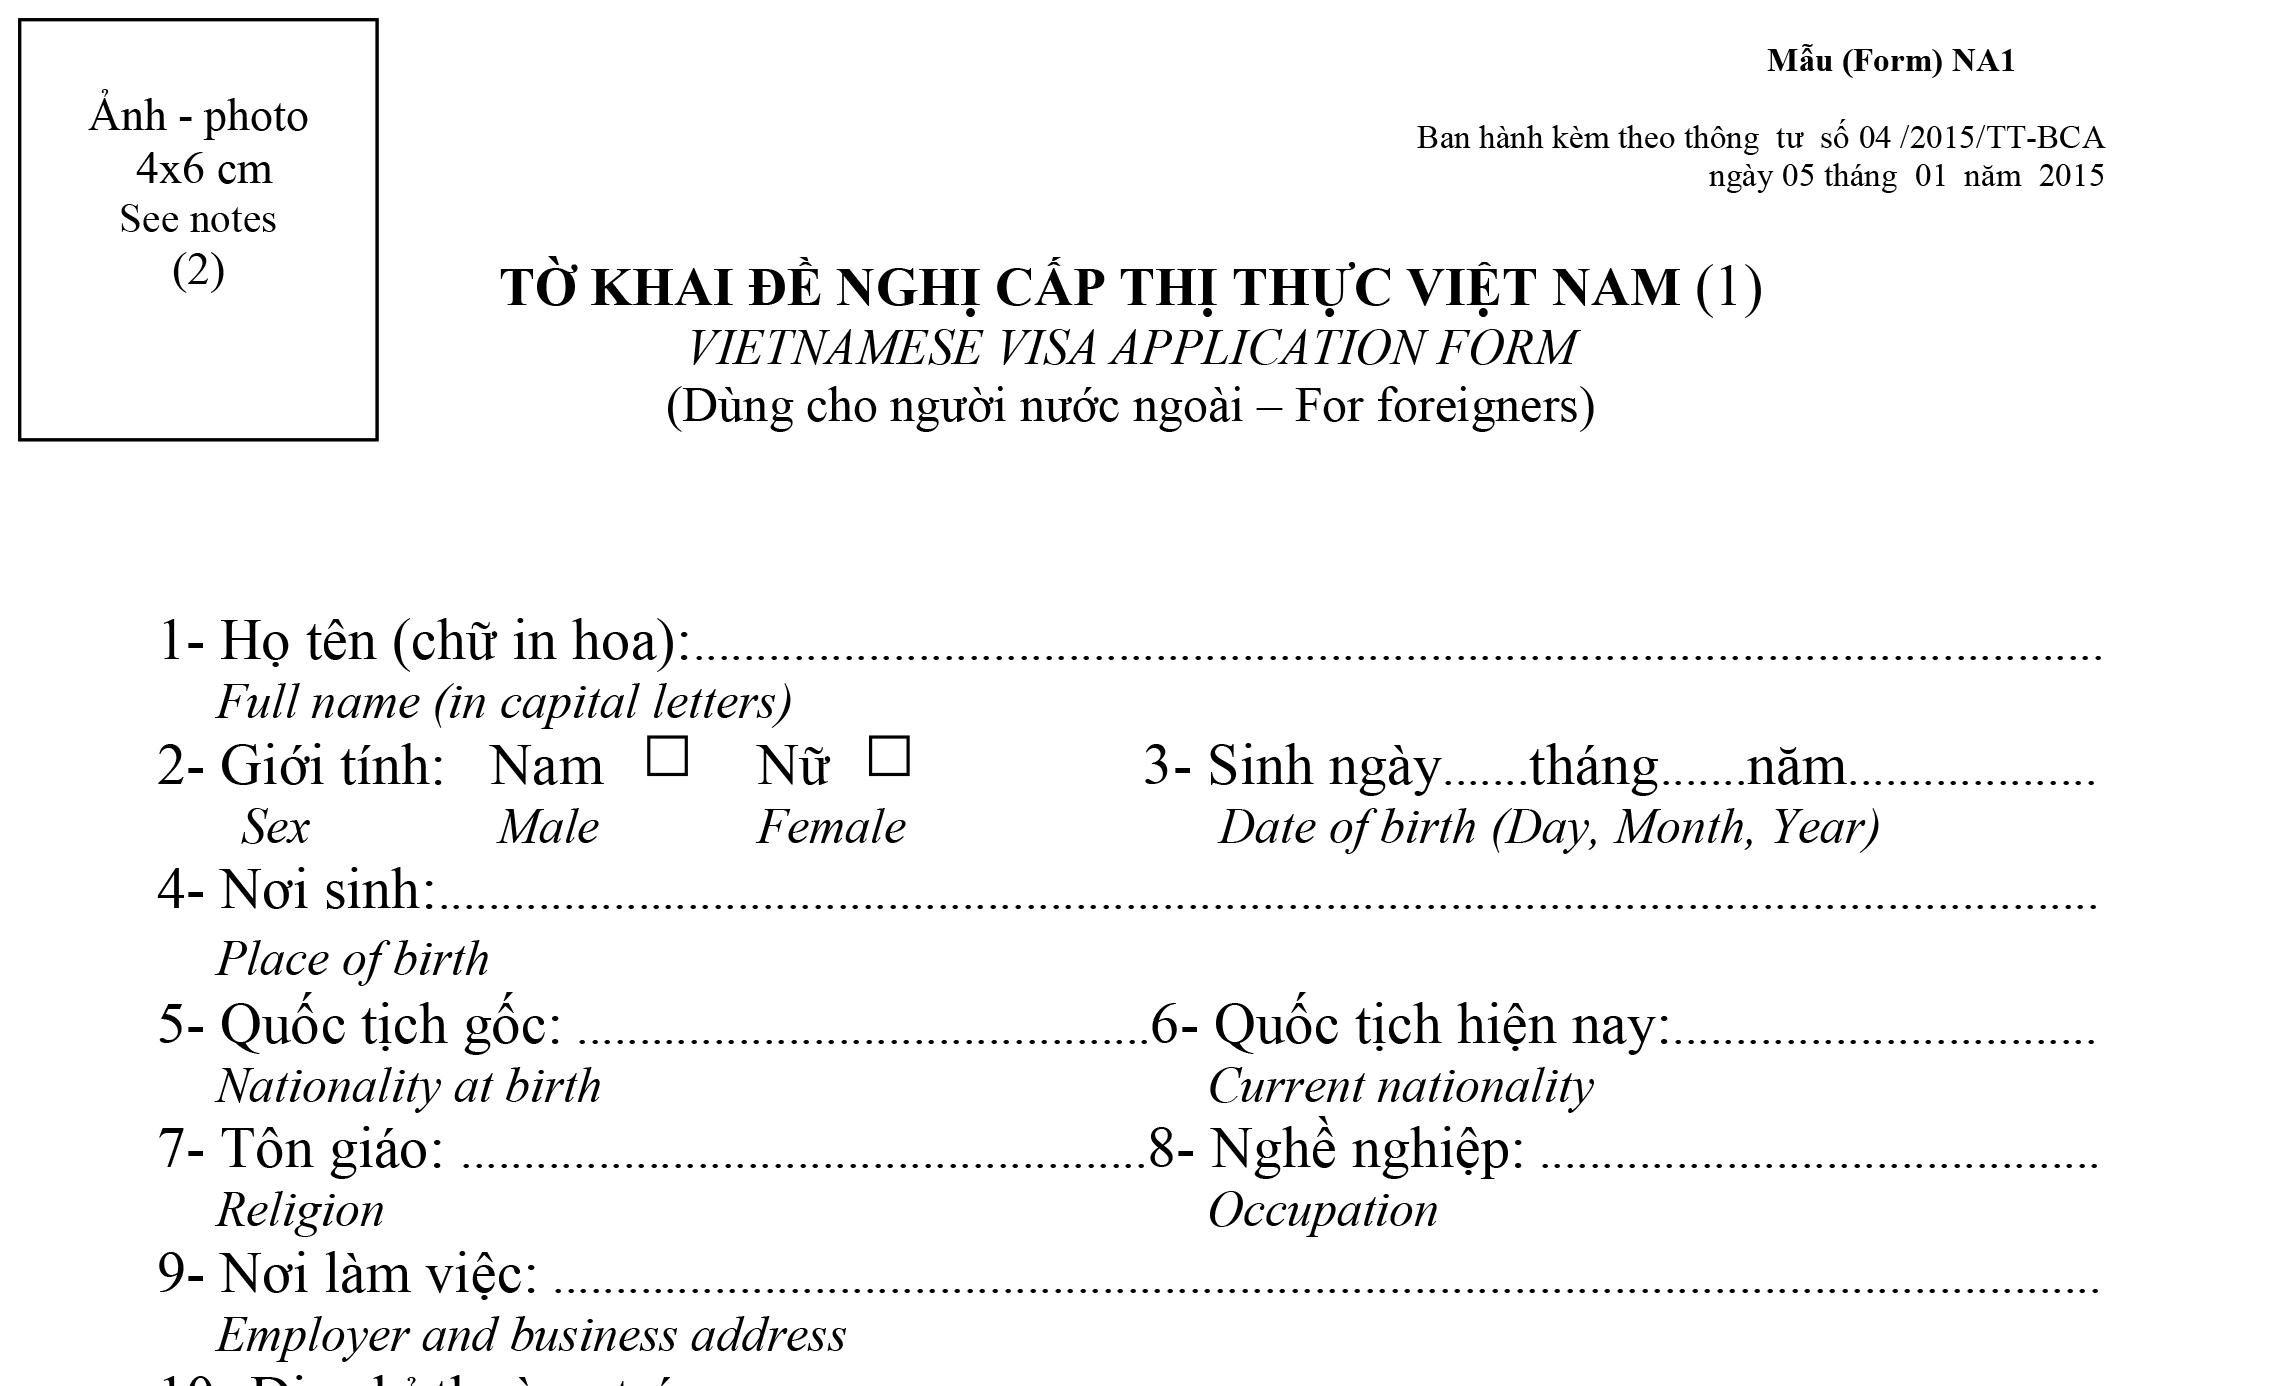 How to Fill Out The Vietnamese Visa Application Form (Form NA1)